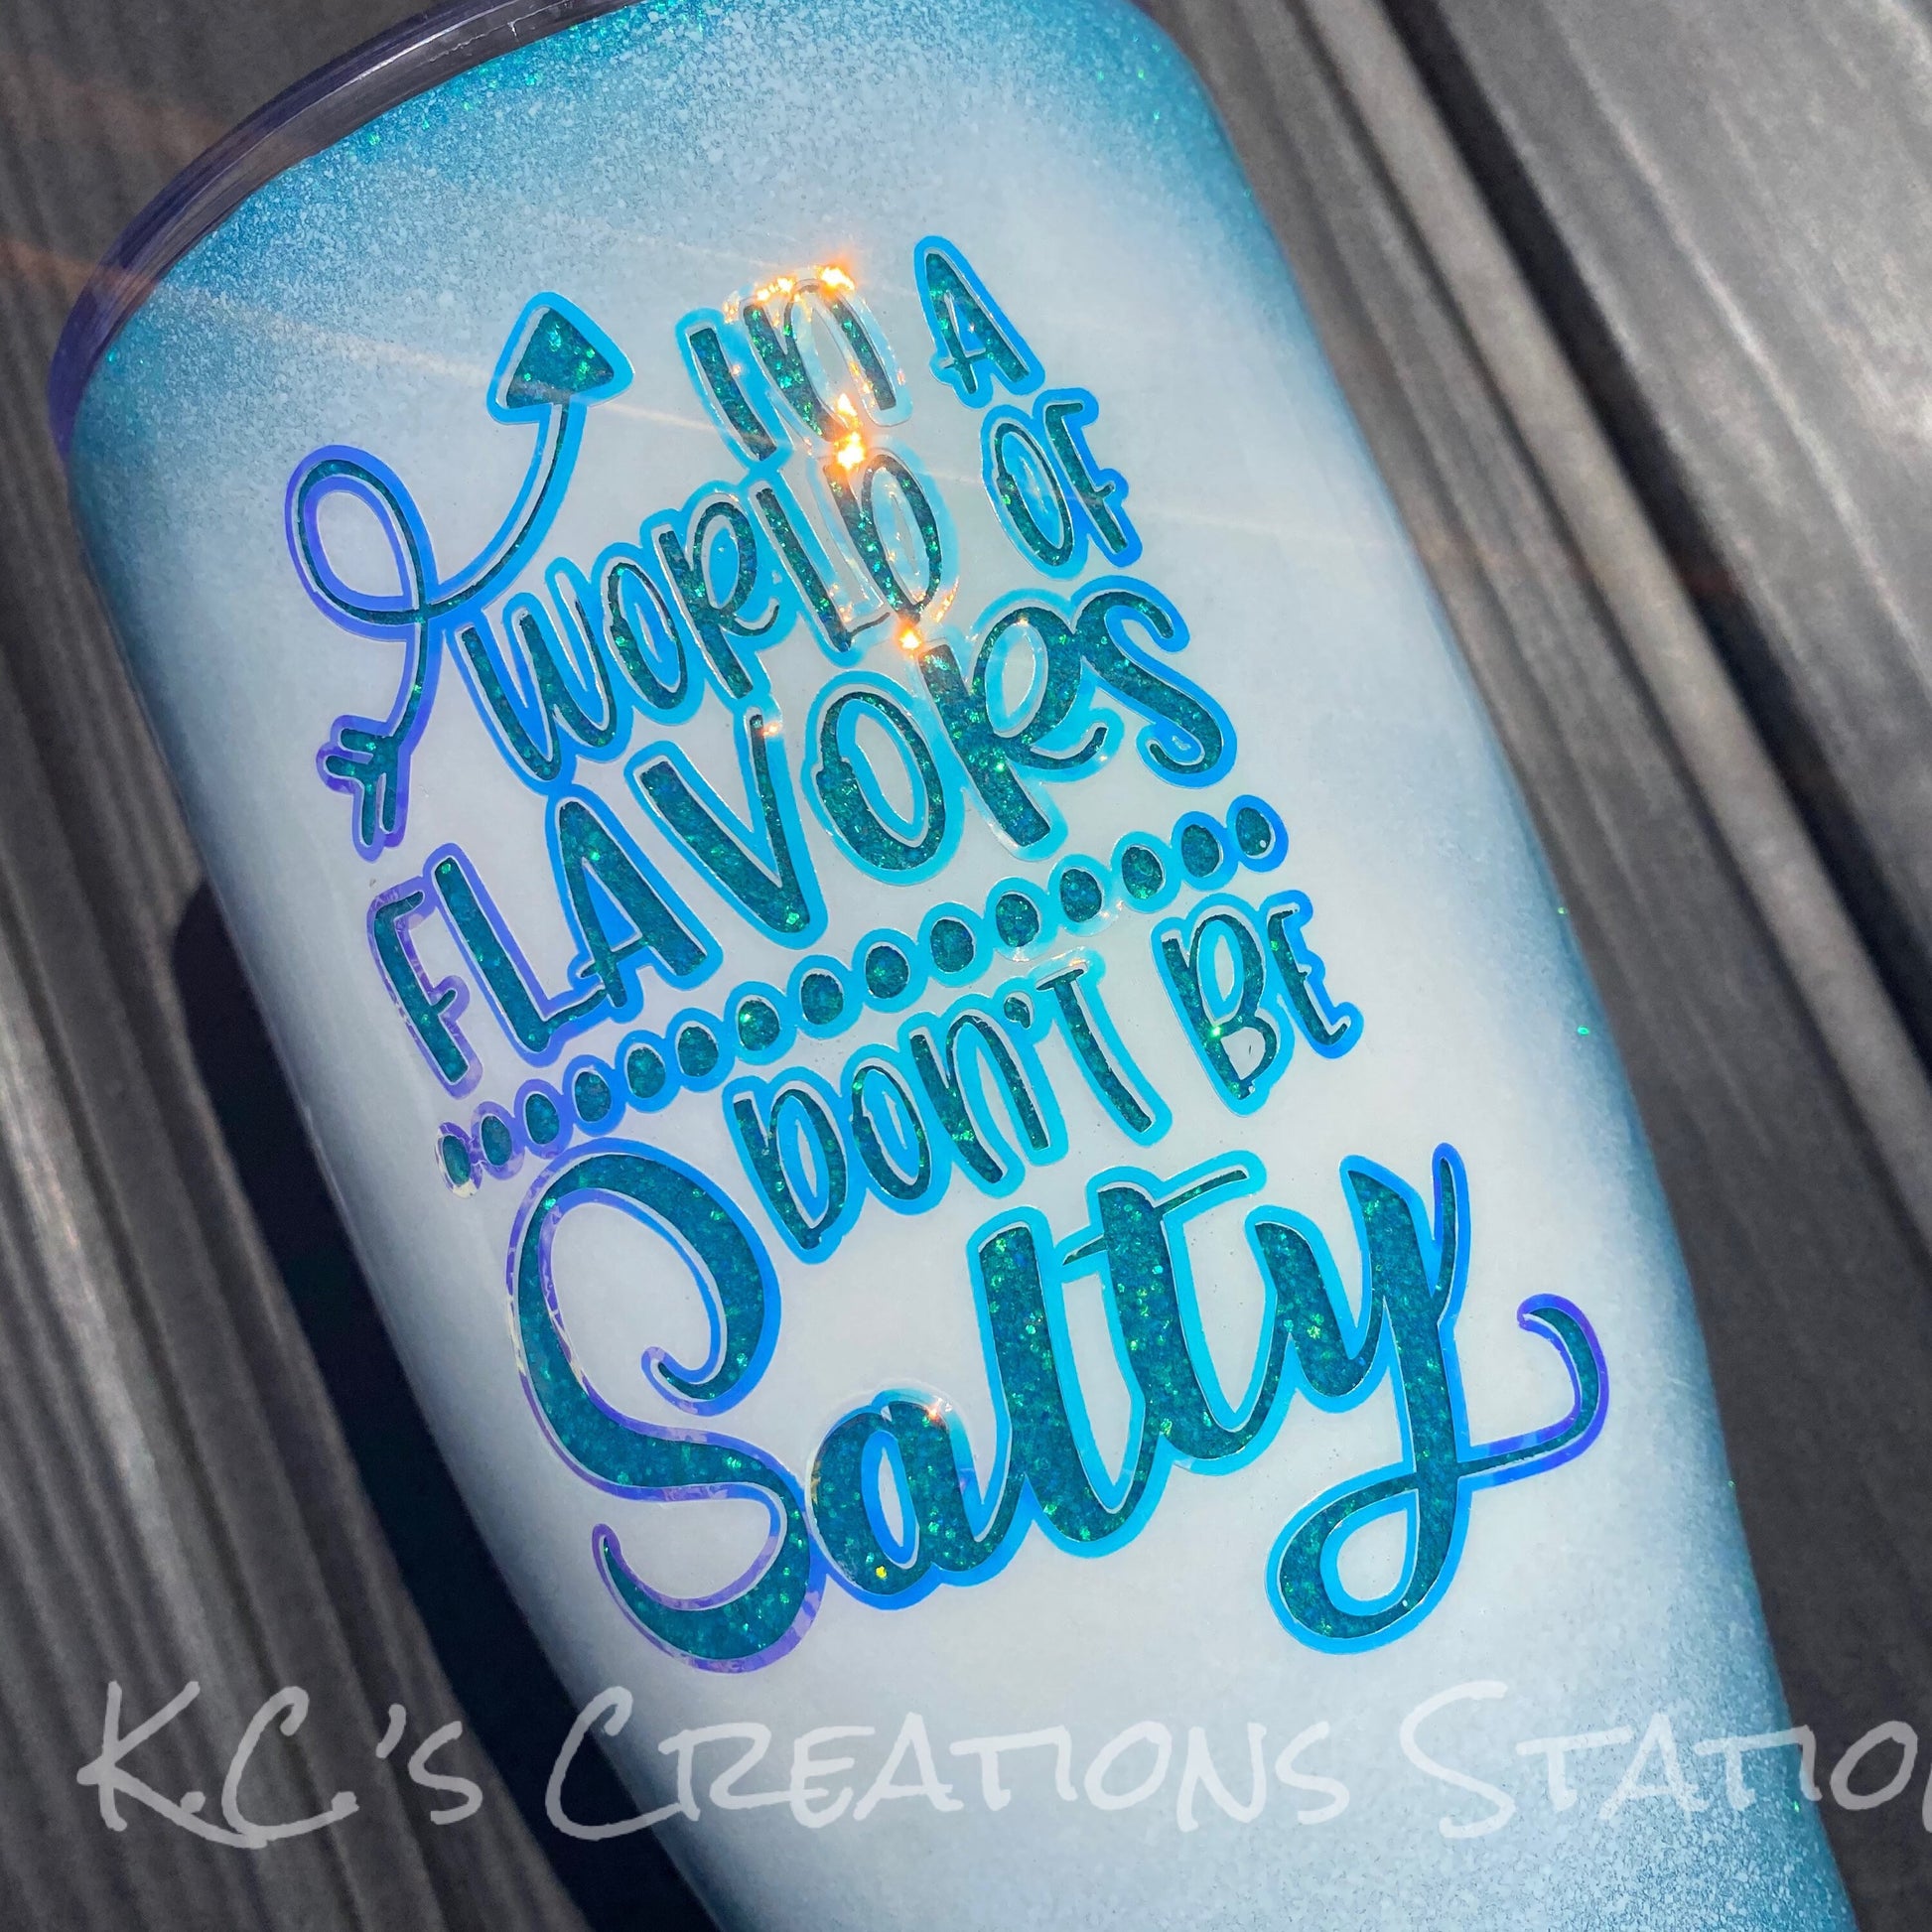 All These Flavors And You Want To Be Salty - Engraved Funny Tumbler, Funny  Gift For Her